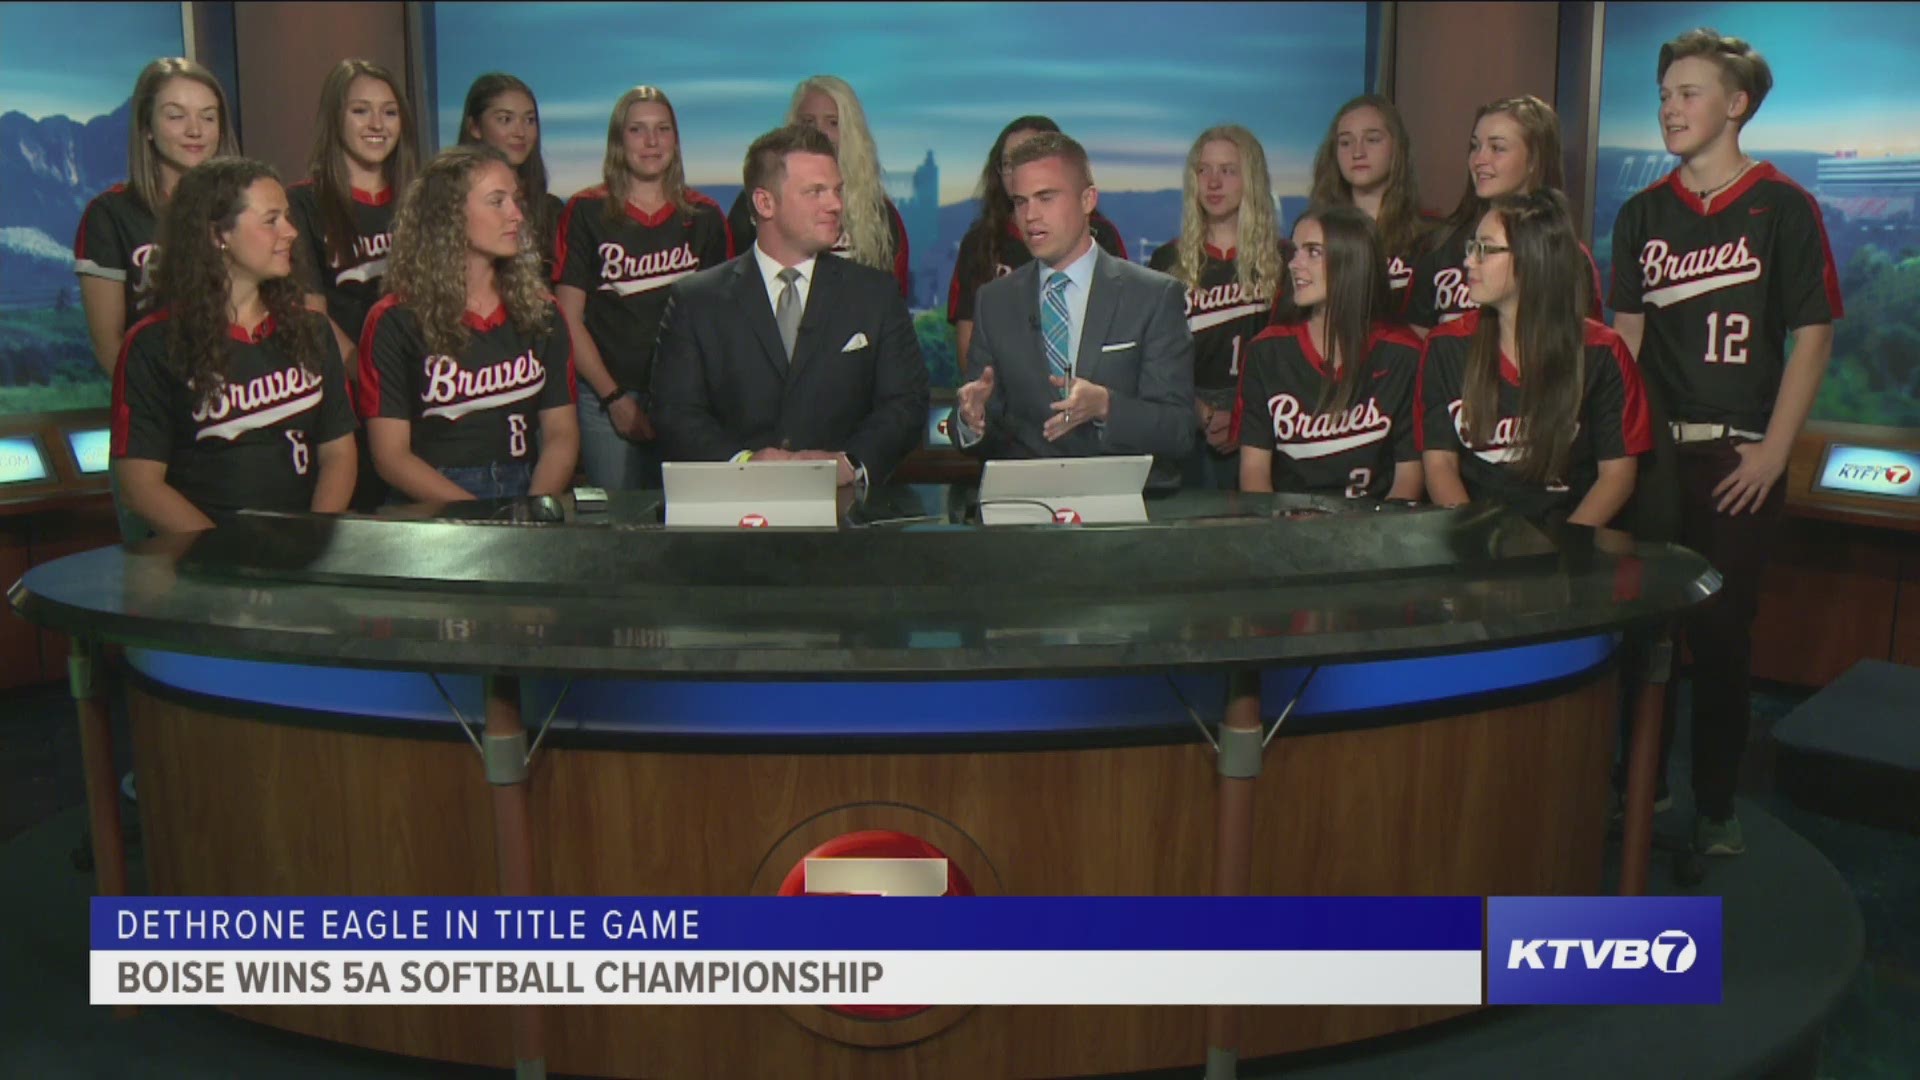 The Boise High School Braves softball team joined Jay Tust and Will Hall in studio after their first ever state softball championship victory, defeating Eagle 6-5.